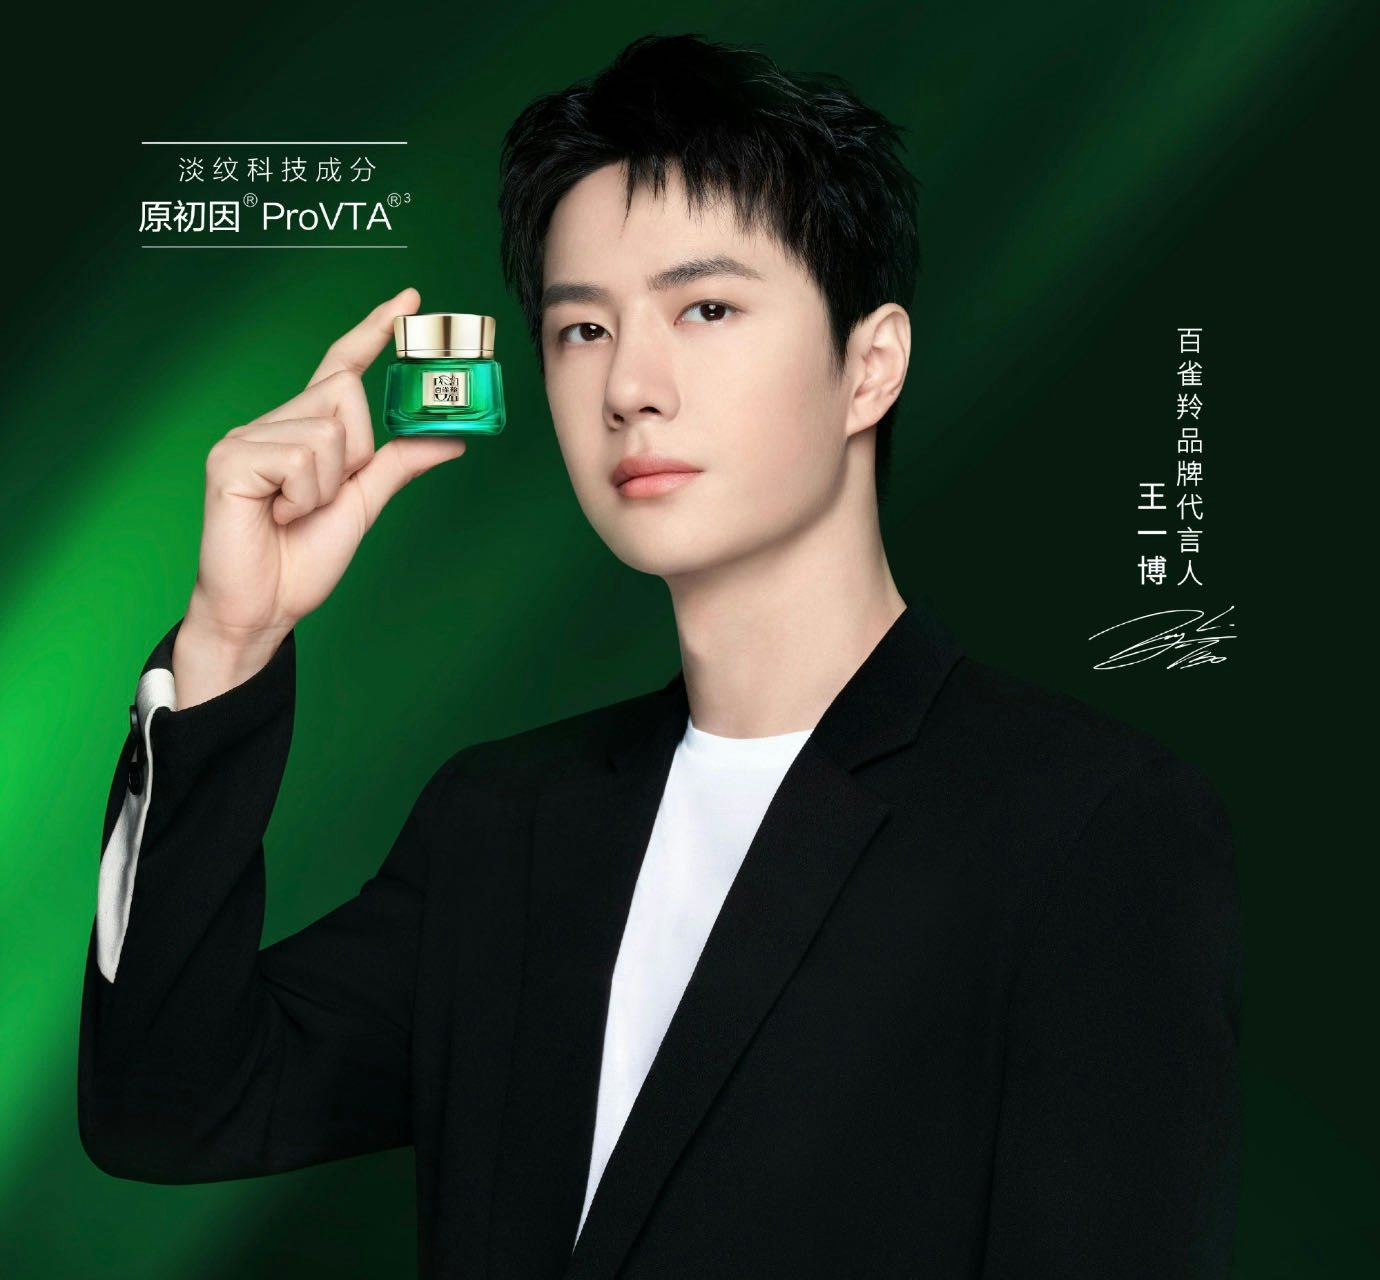 Actor and dancer Wang Yibo is the brand ambassador of the Chinese beauty brand Pechoin. Image: Pechoin's Weibo